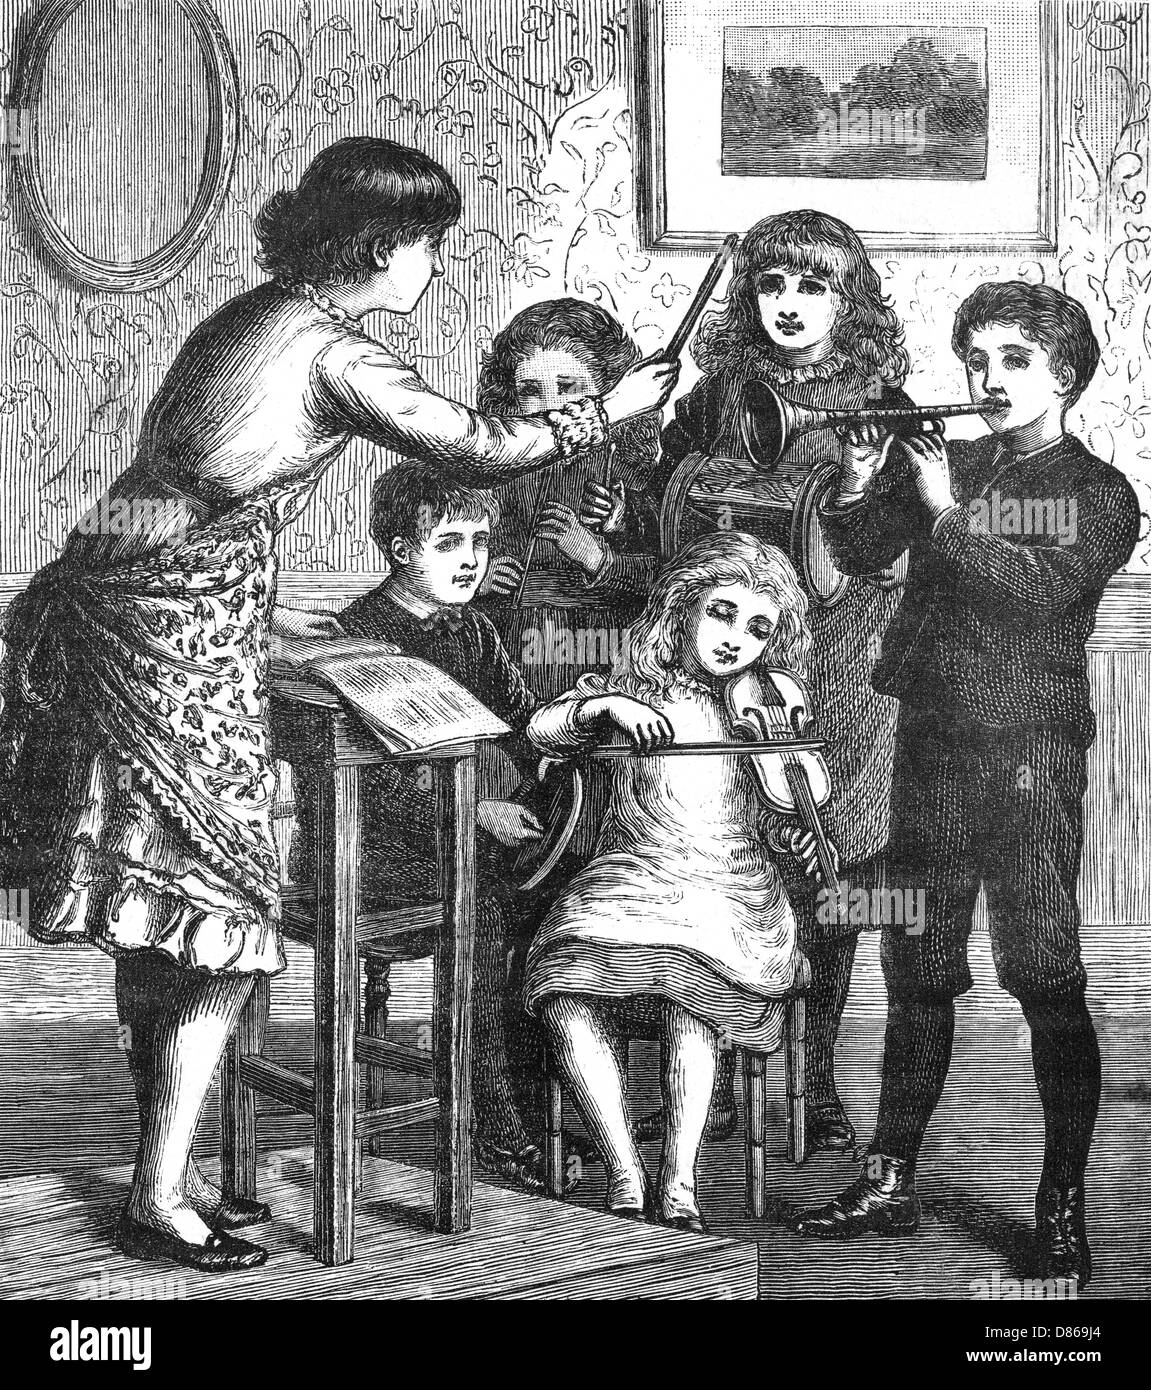 Music at home - ensemble of children conducted, c.1870 Stock Photo